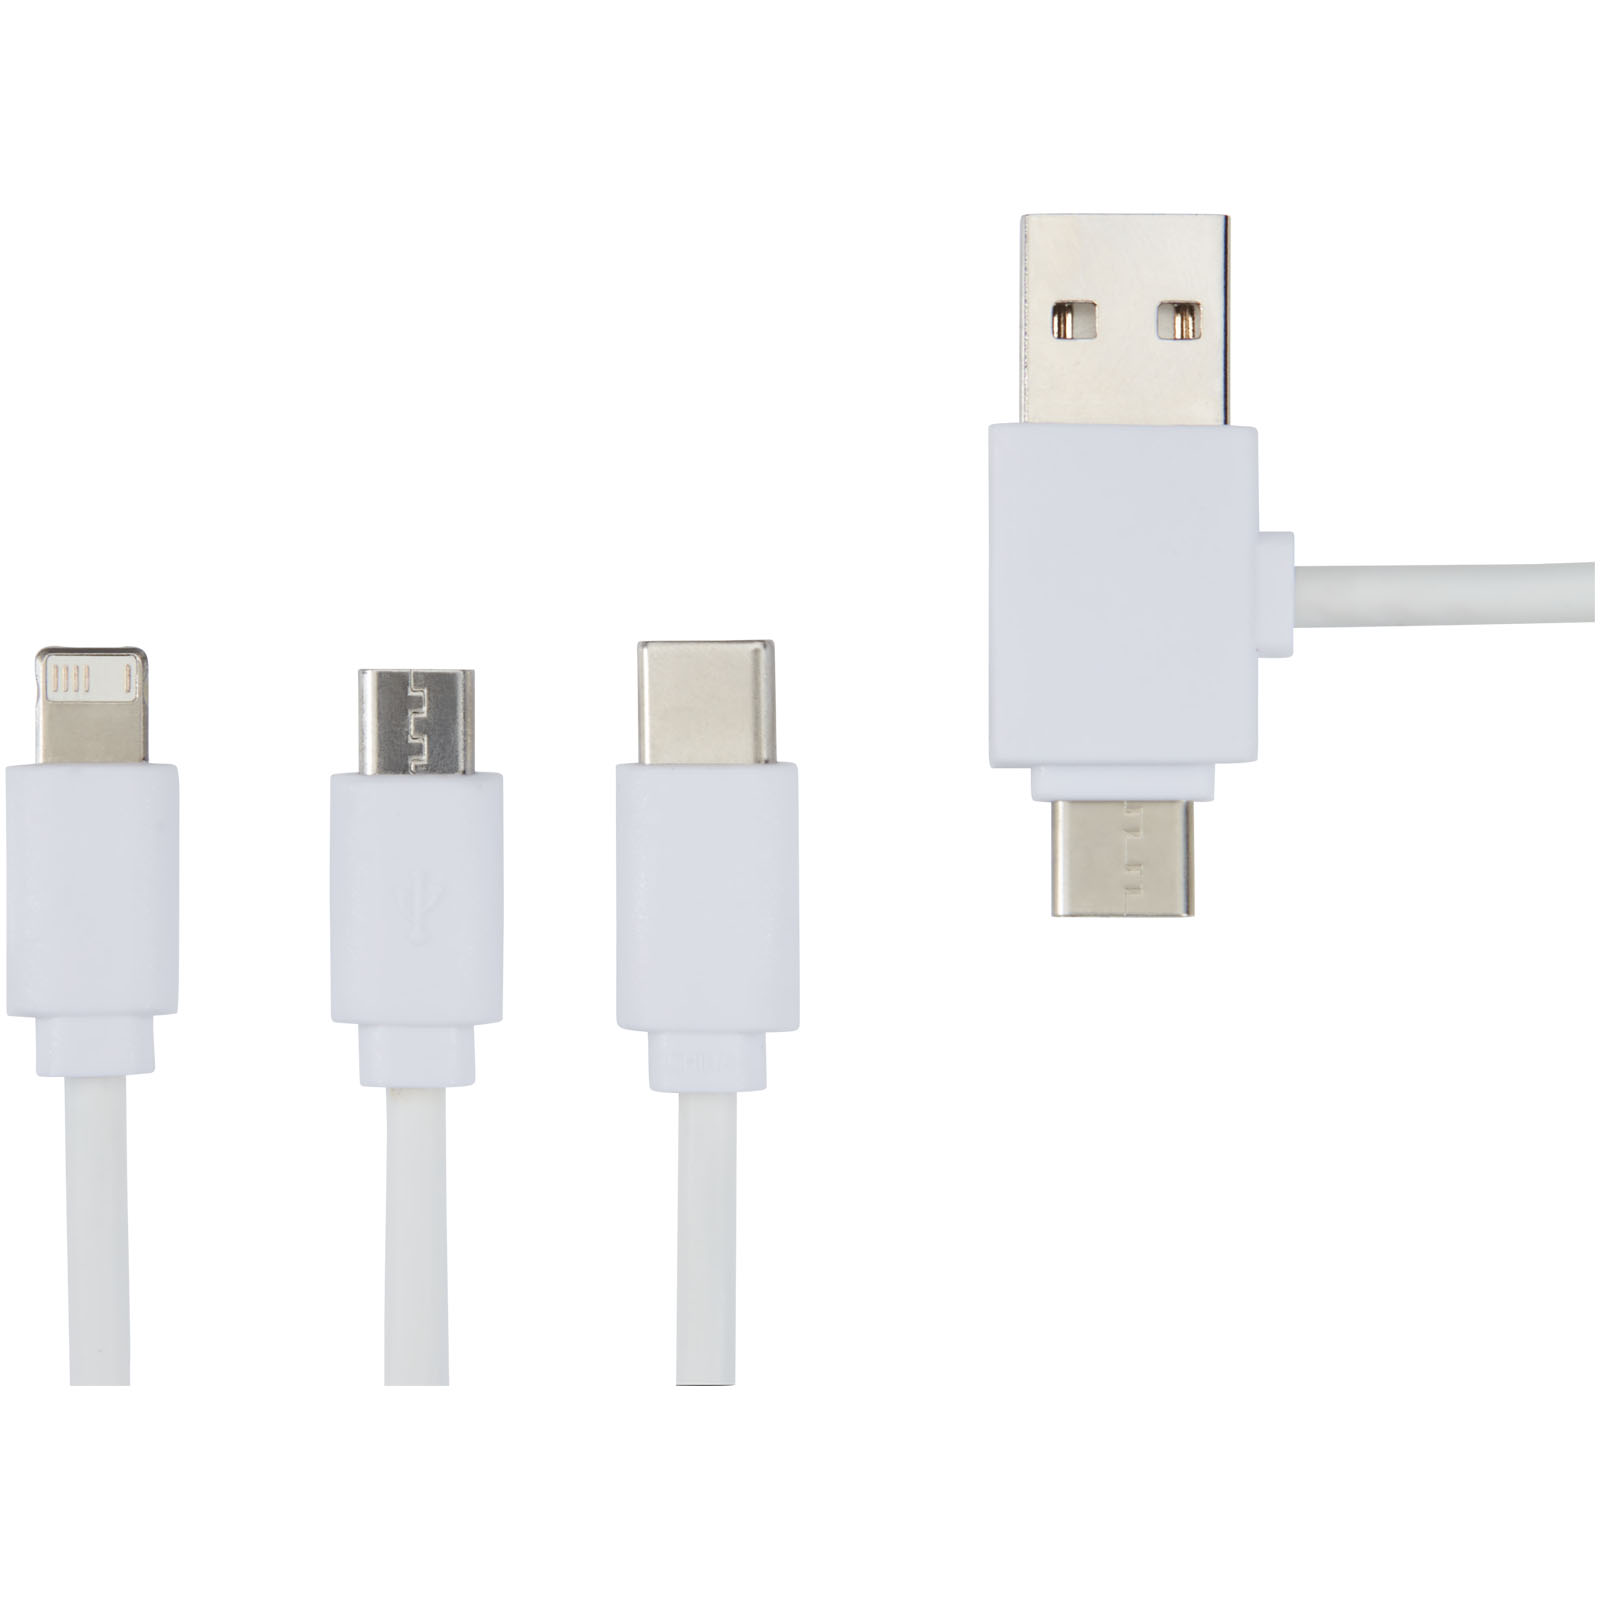 Advertising Cables - Pure 5-in-1 charging cable with antibacterial additive - 4